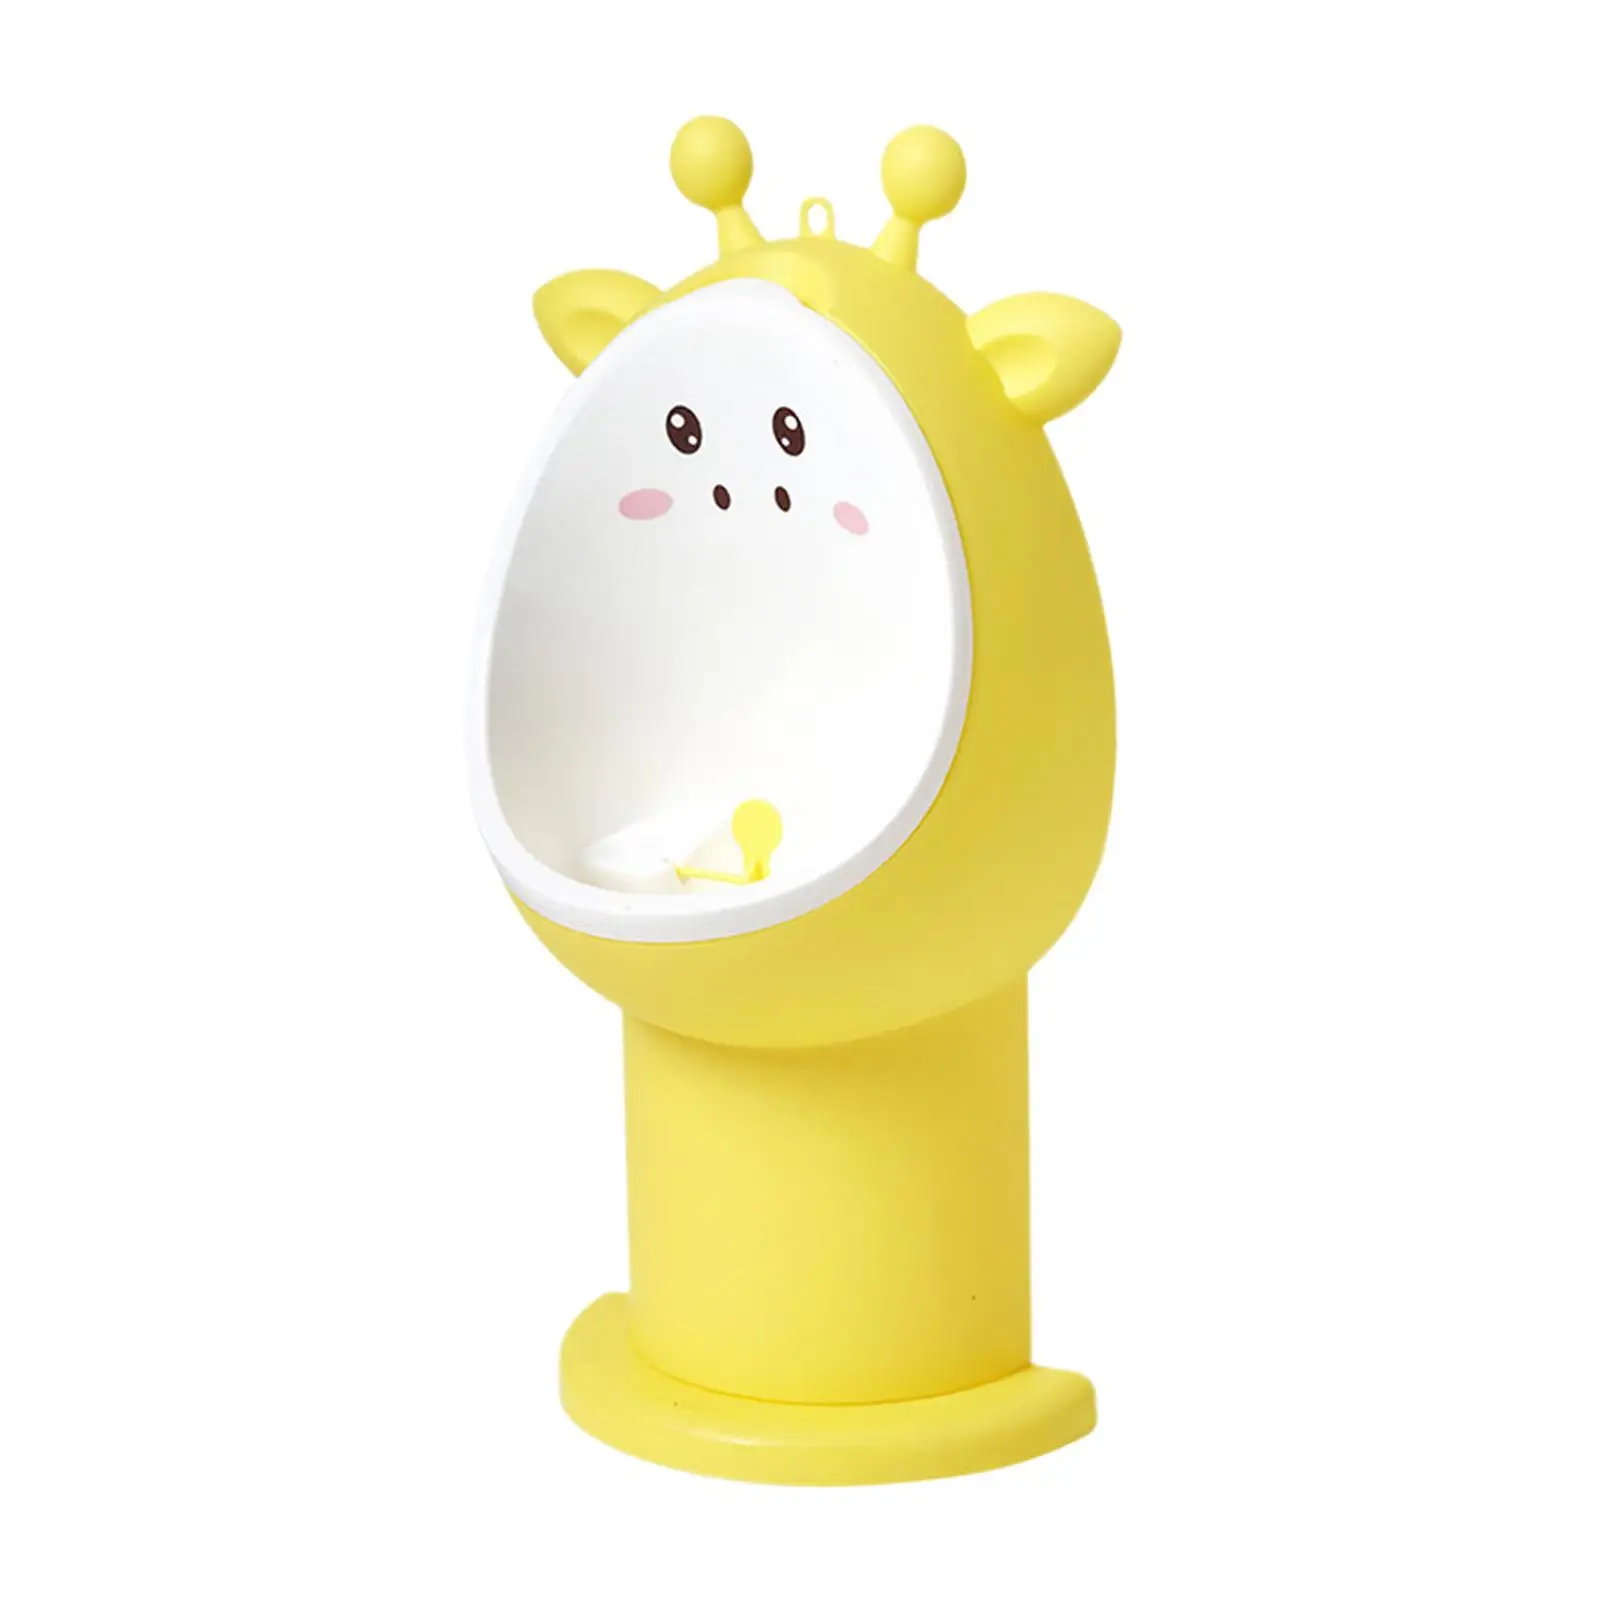 Cartoon Animal Pee Potty Training Urinal Boy Standing Urinal Sturdy for Kids 1 to 6 Years Old Adjustable Height 3 Levels Lovely